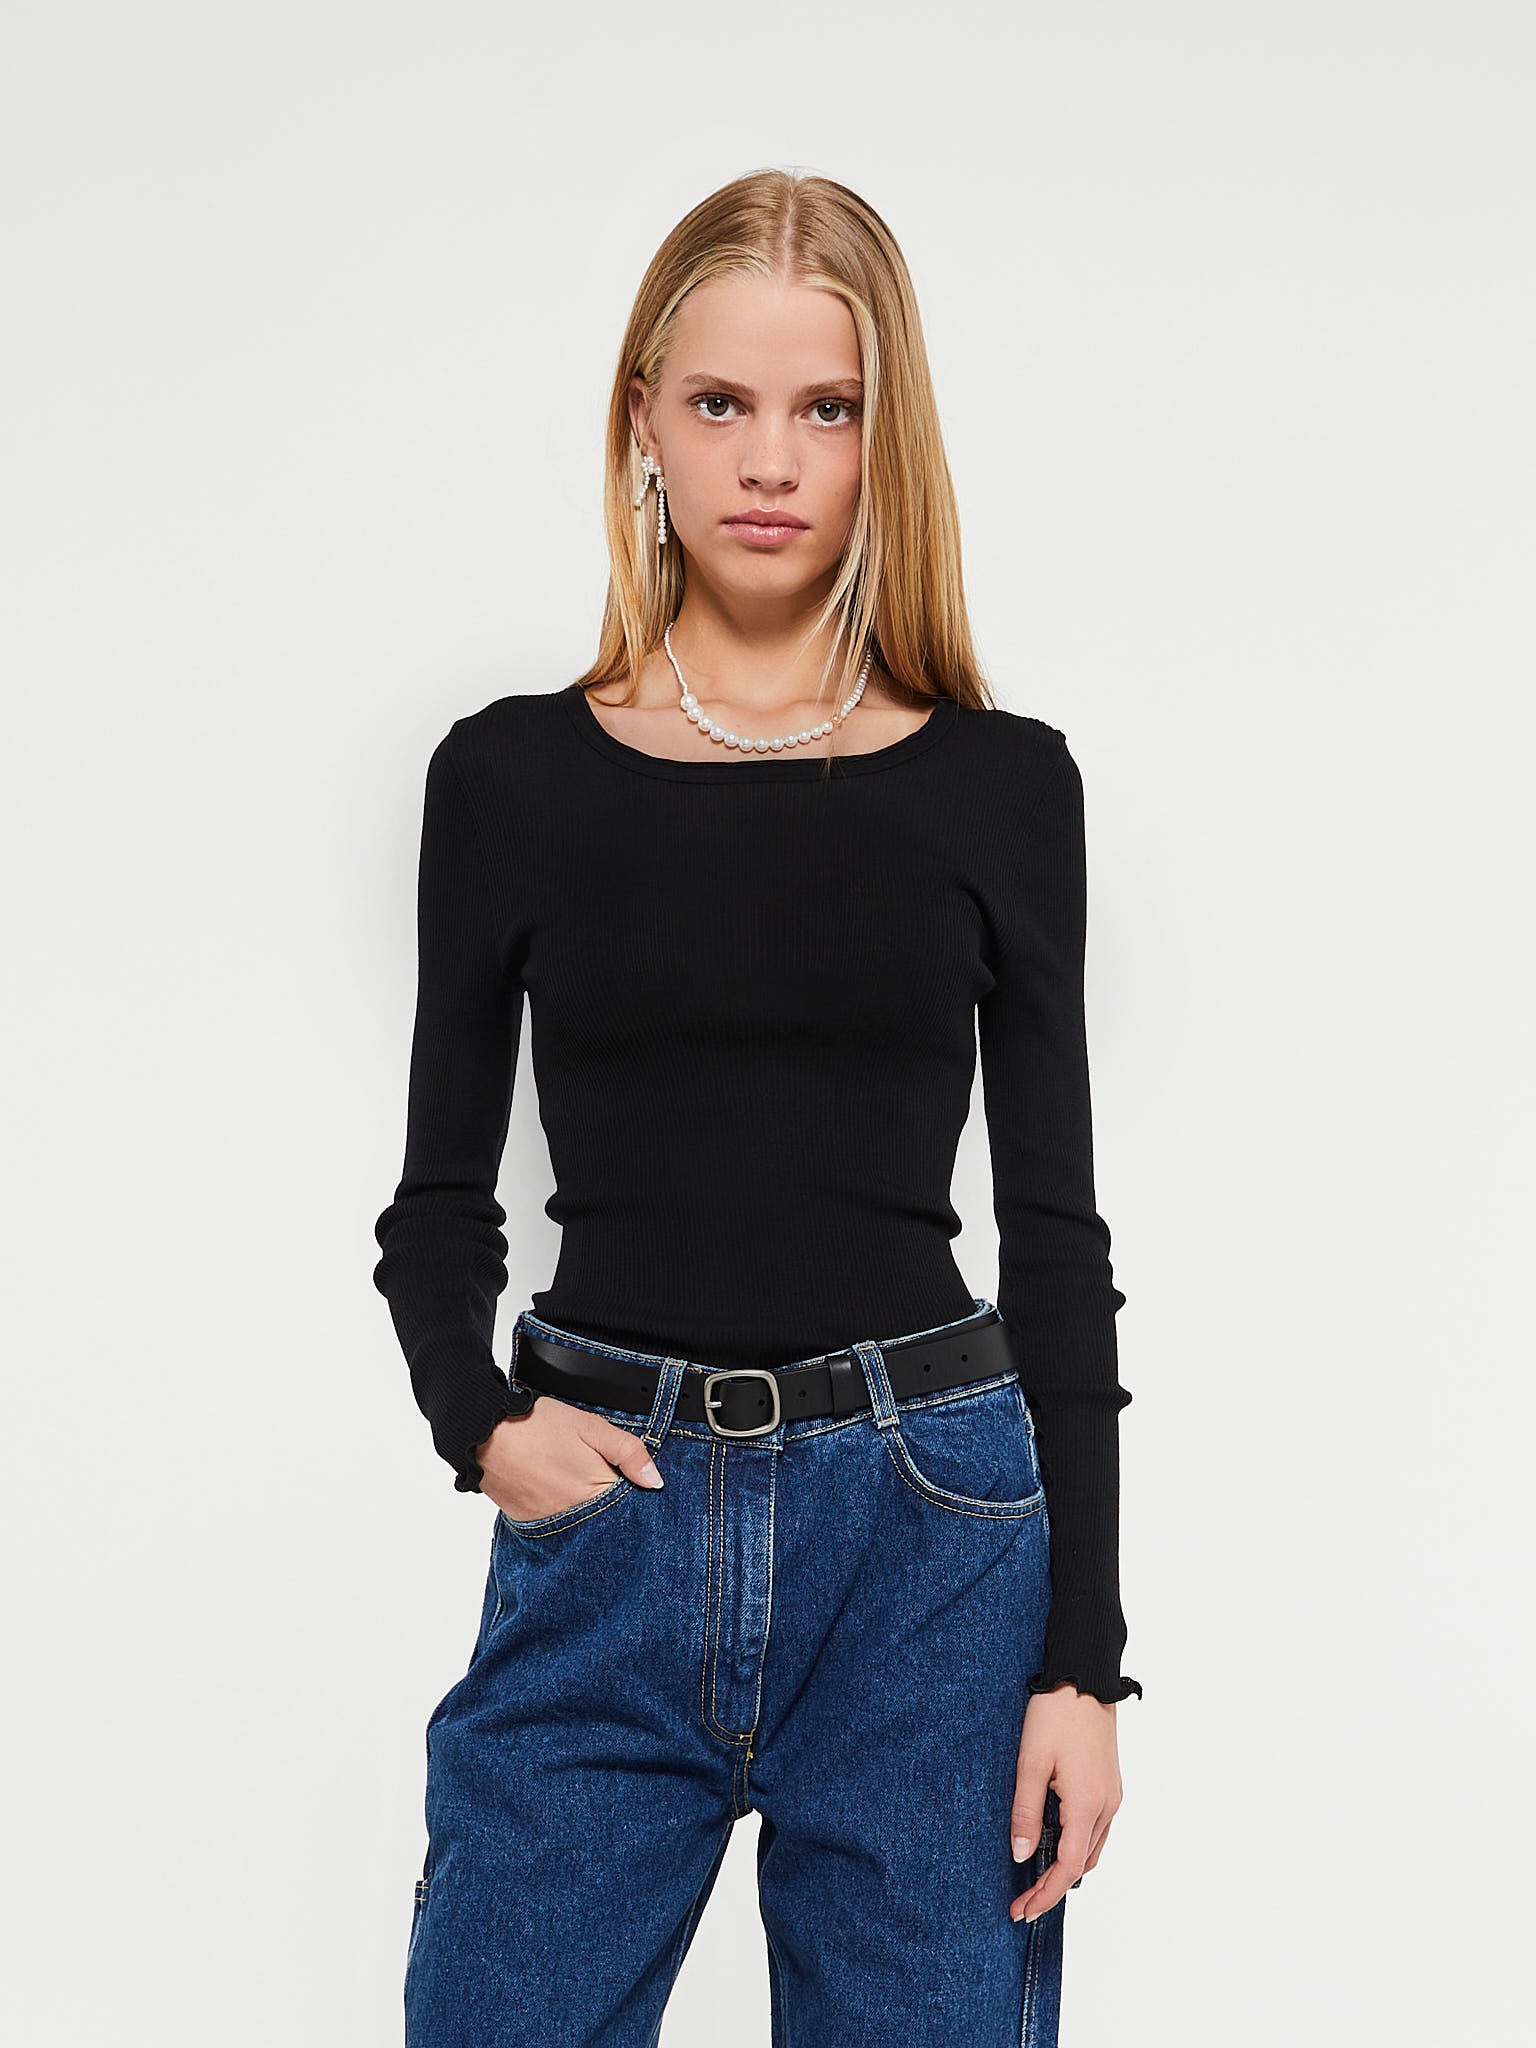 Oscalito - Black Round Neck Longsleeves Top in wool and Silk